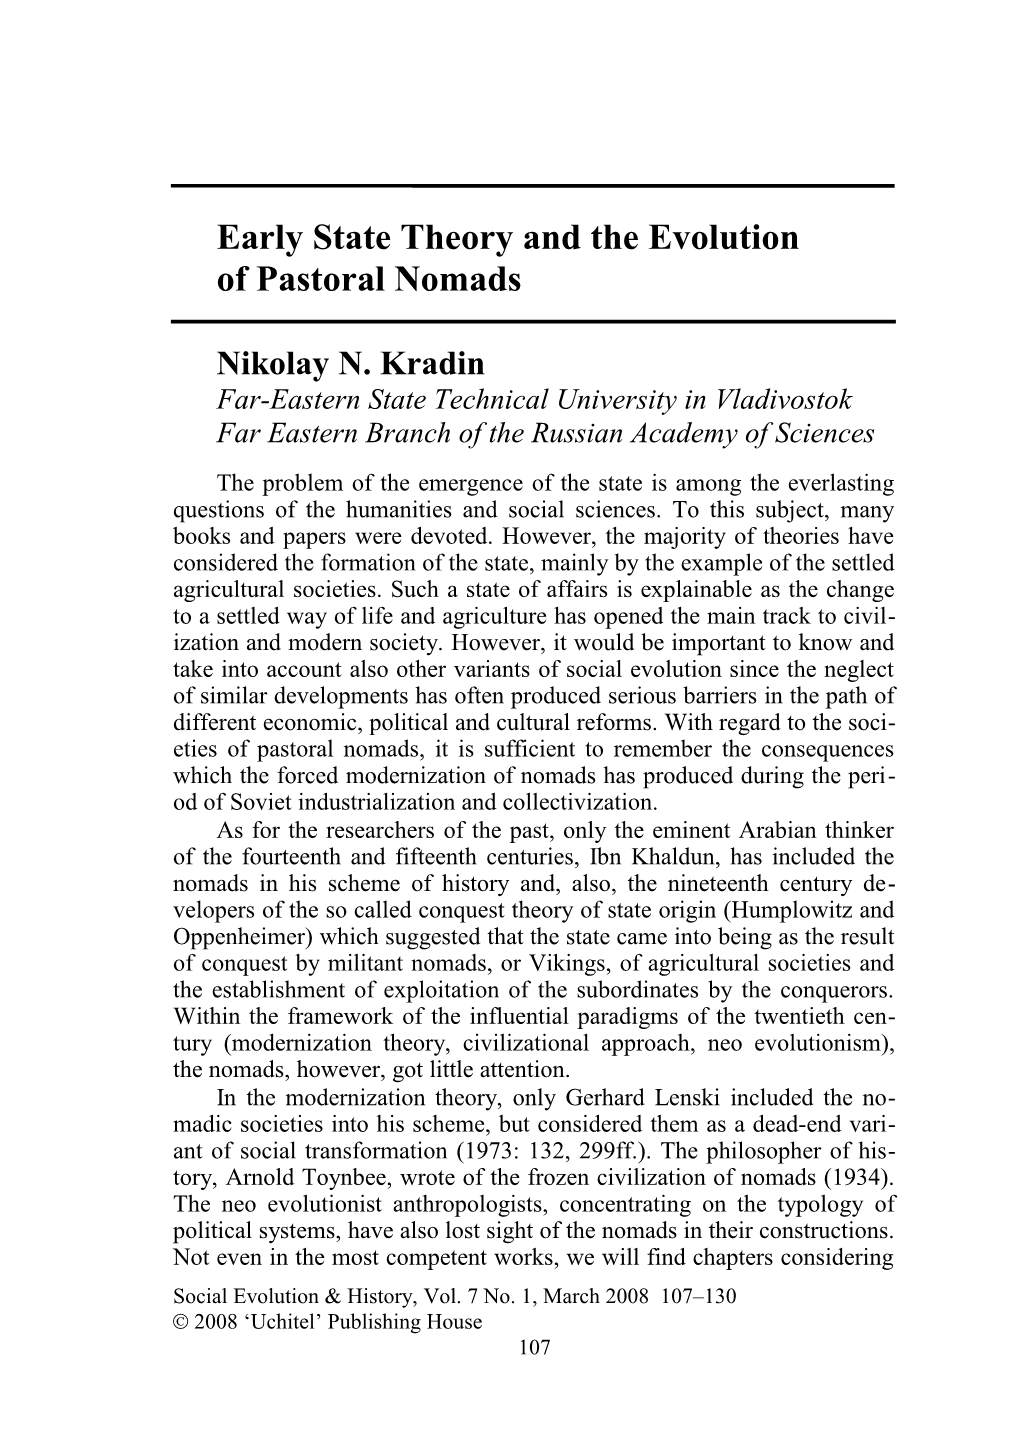 Idealism, Materialism, and Biology in the Analysis of Cultural Evolution s2